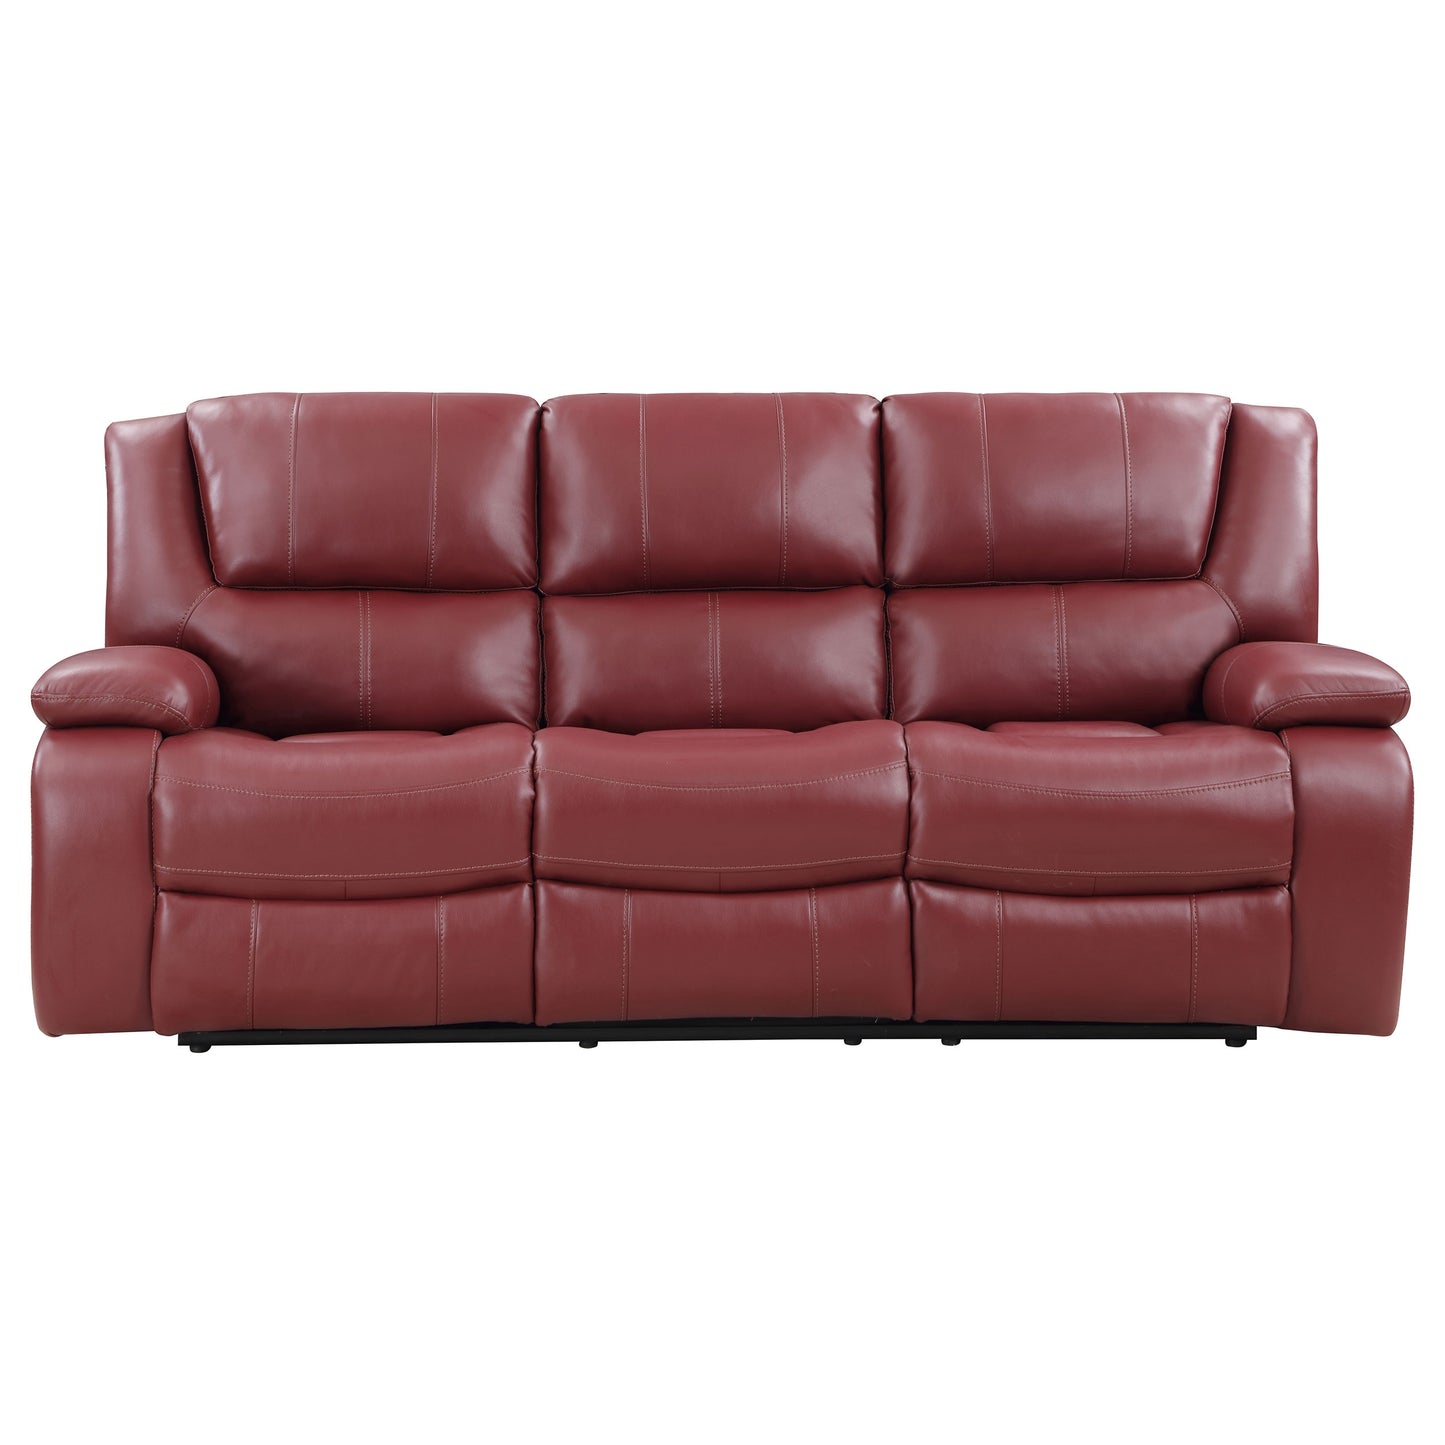 Camila 3-piece Upholstered Reclining Sofa Set Red